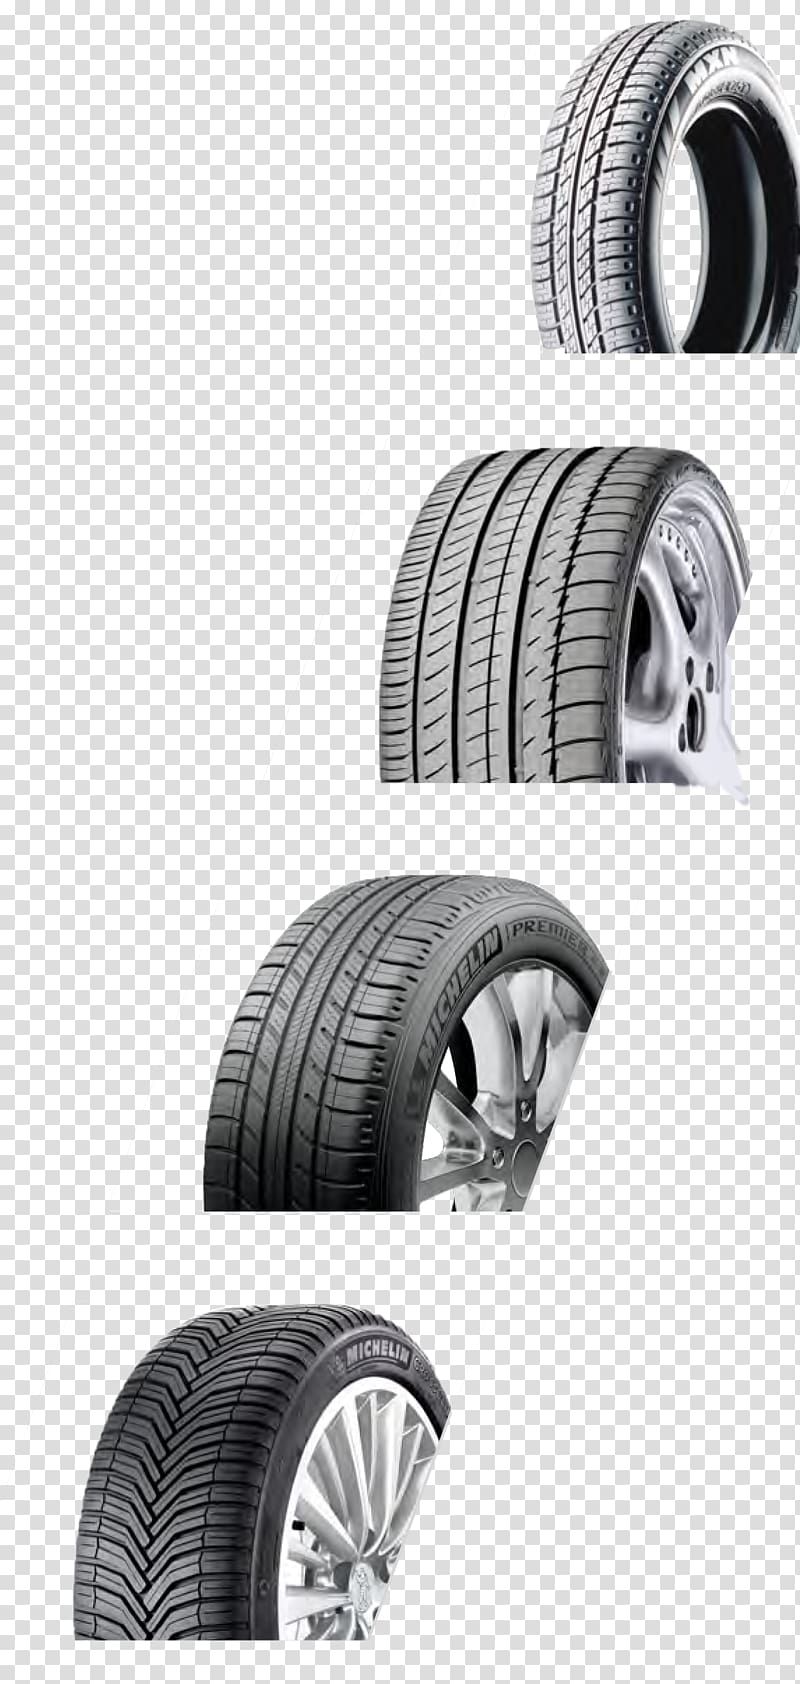 Tread Formula One tyres Michelin CrossClimate SUV Tire, others transparent background PNG clipart